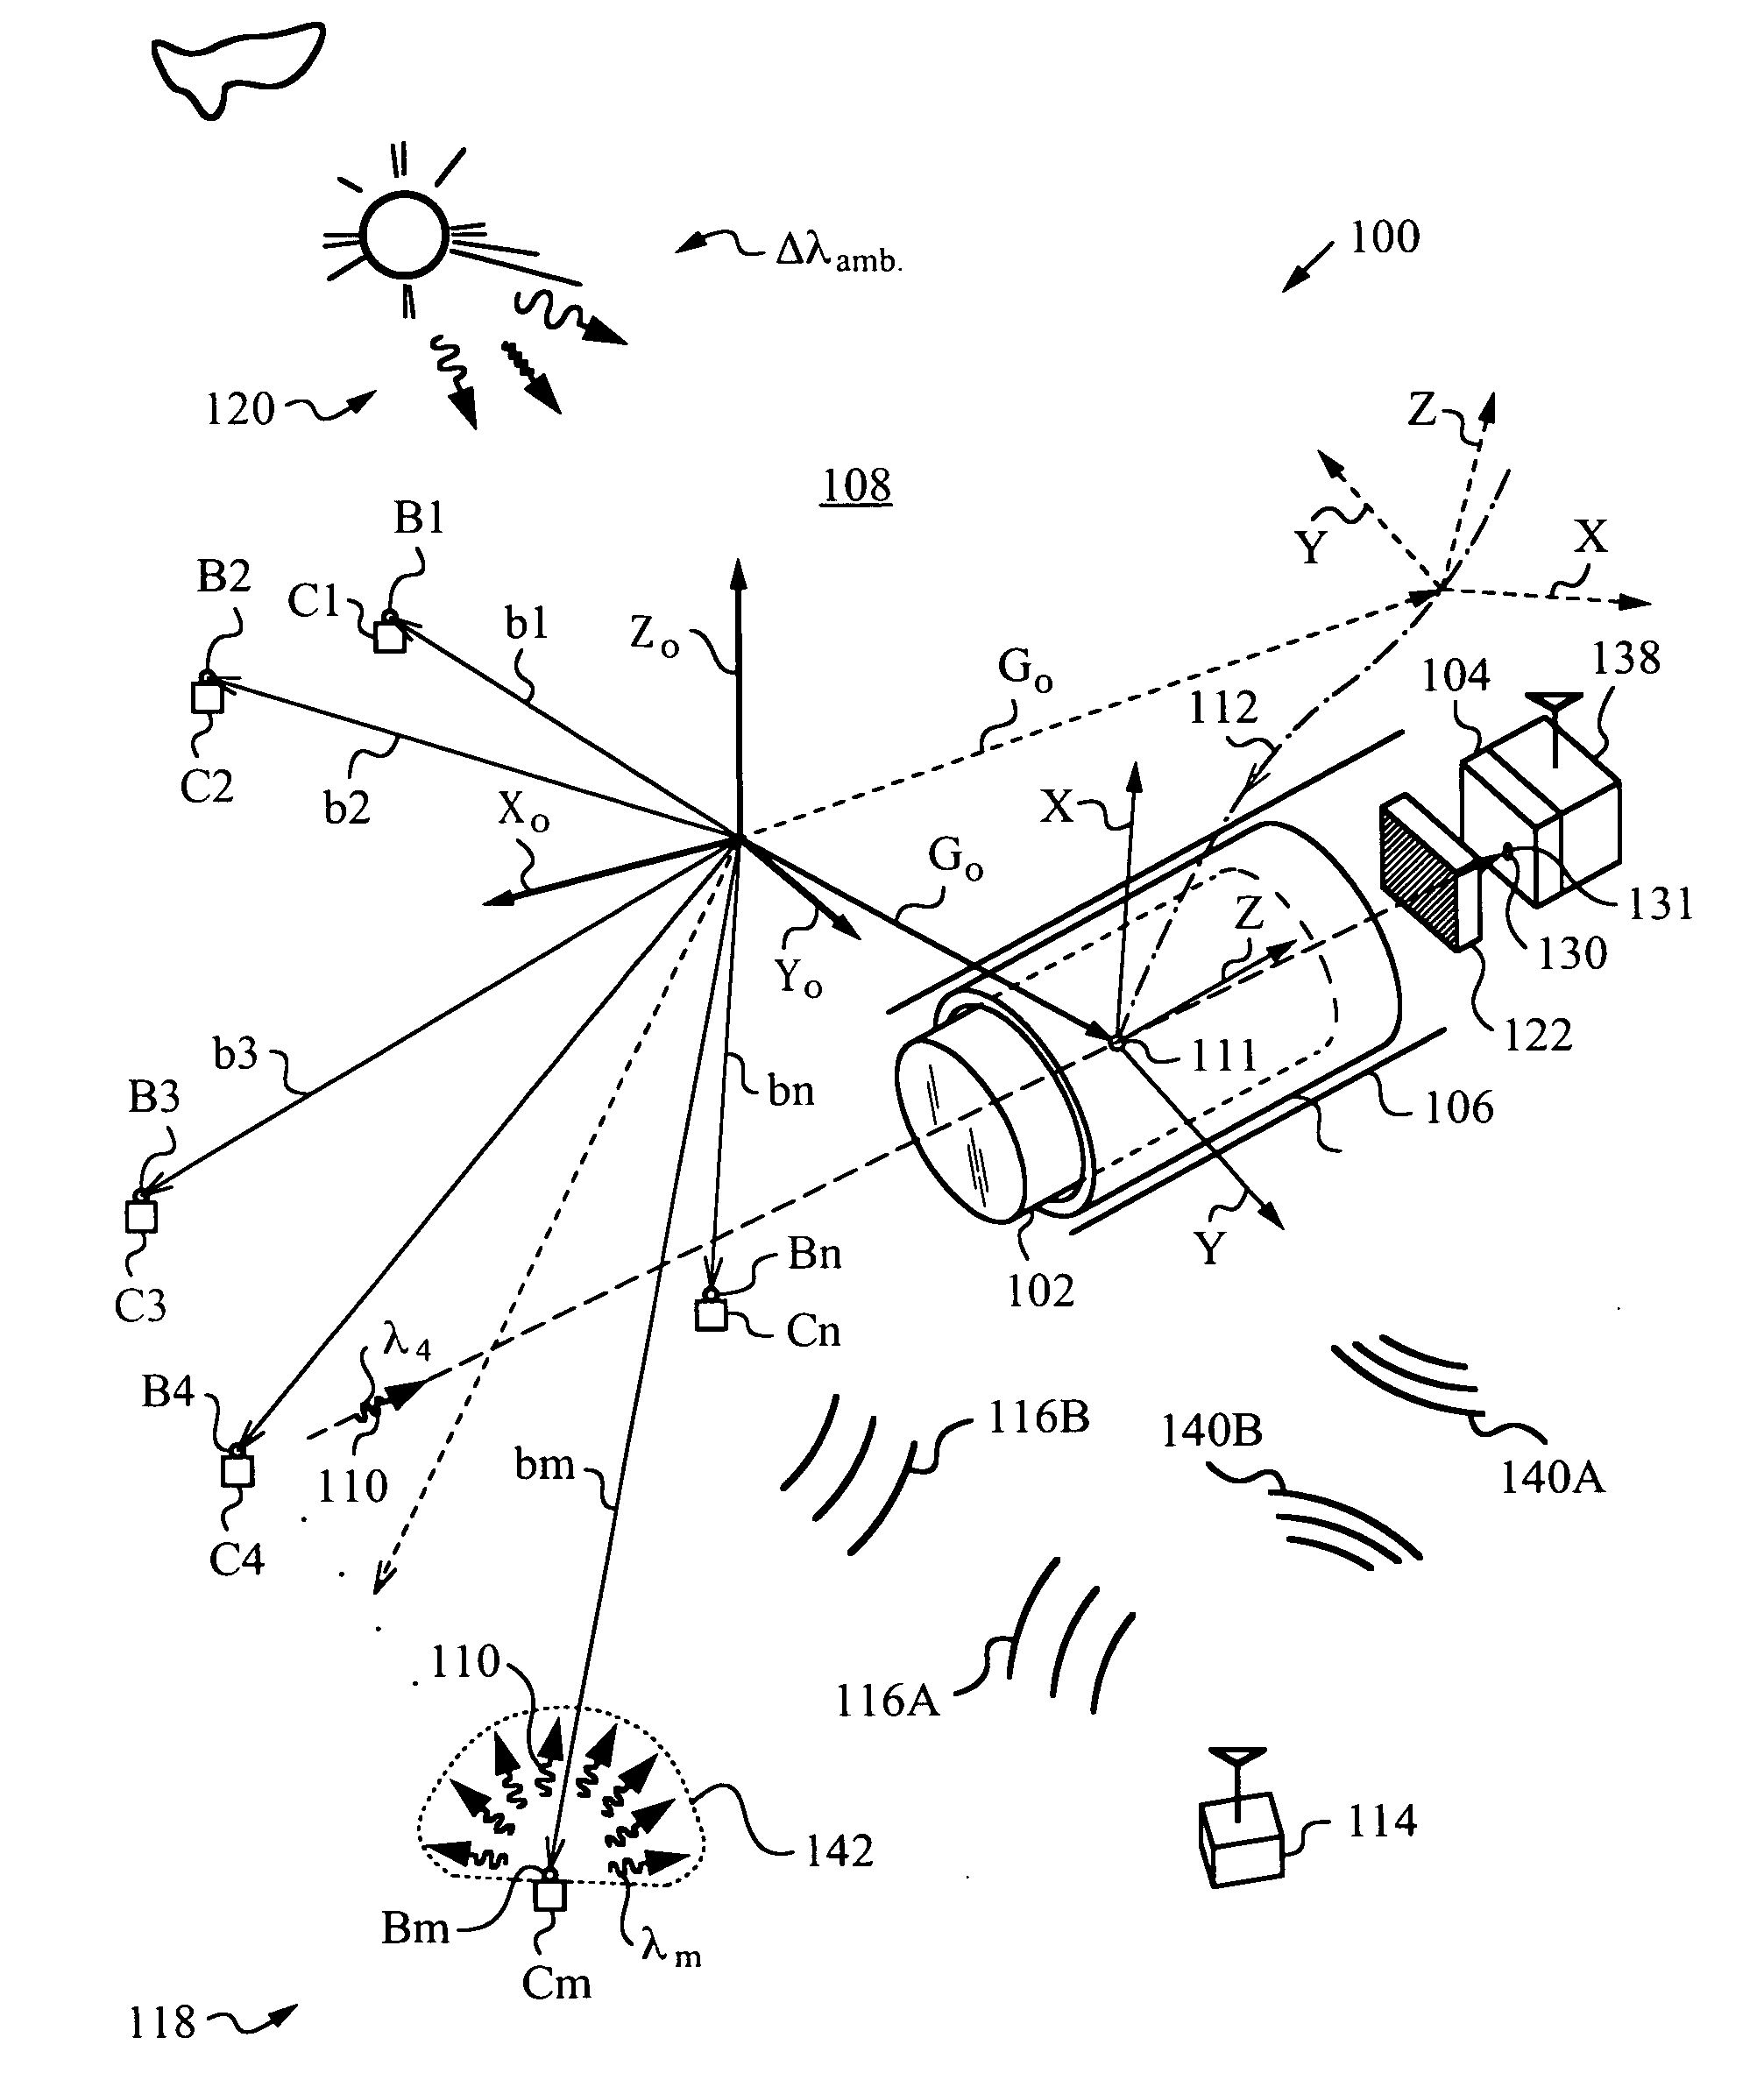 Optical navigation apparatus using fixed beacons and a centroid sensing device